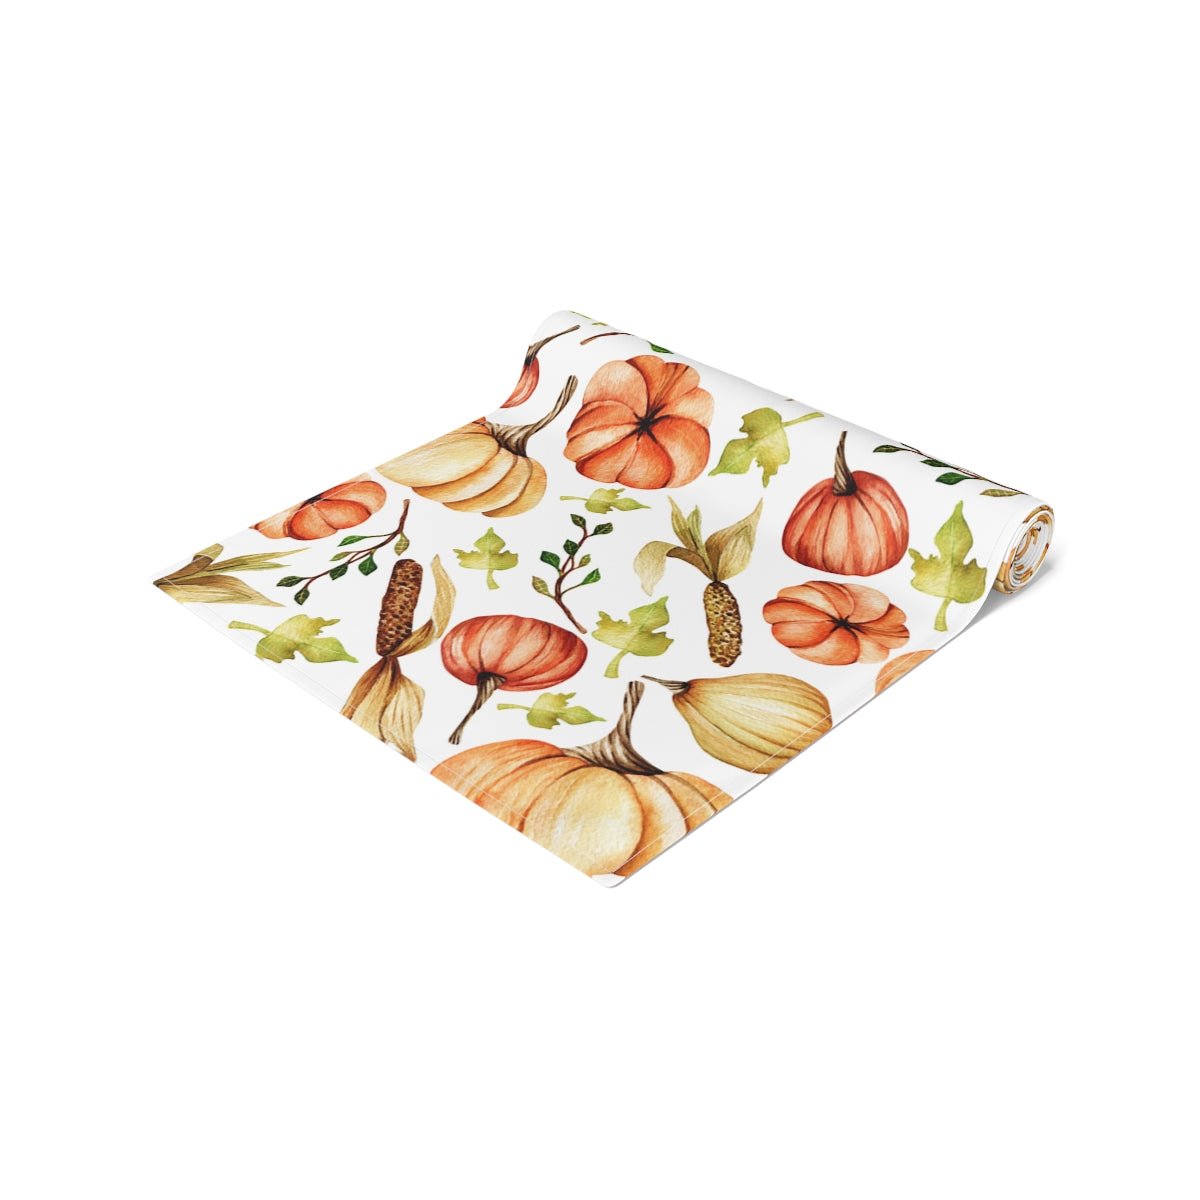 Fall Pumpkins and Corn Table Runner - Puffin Lime